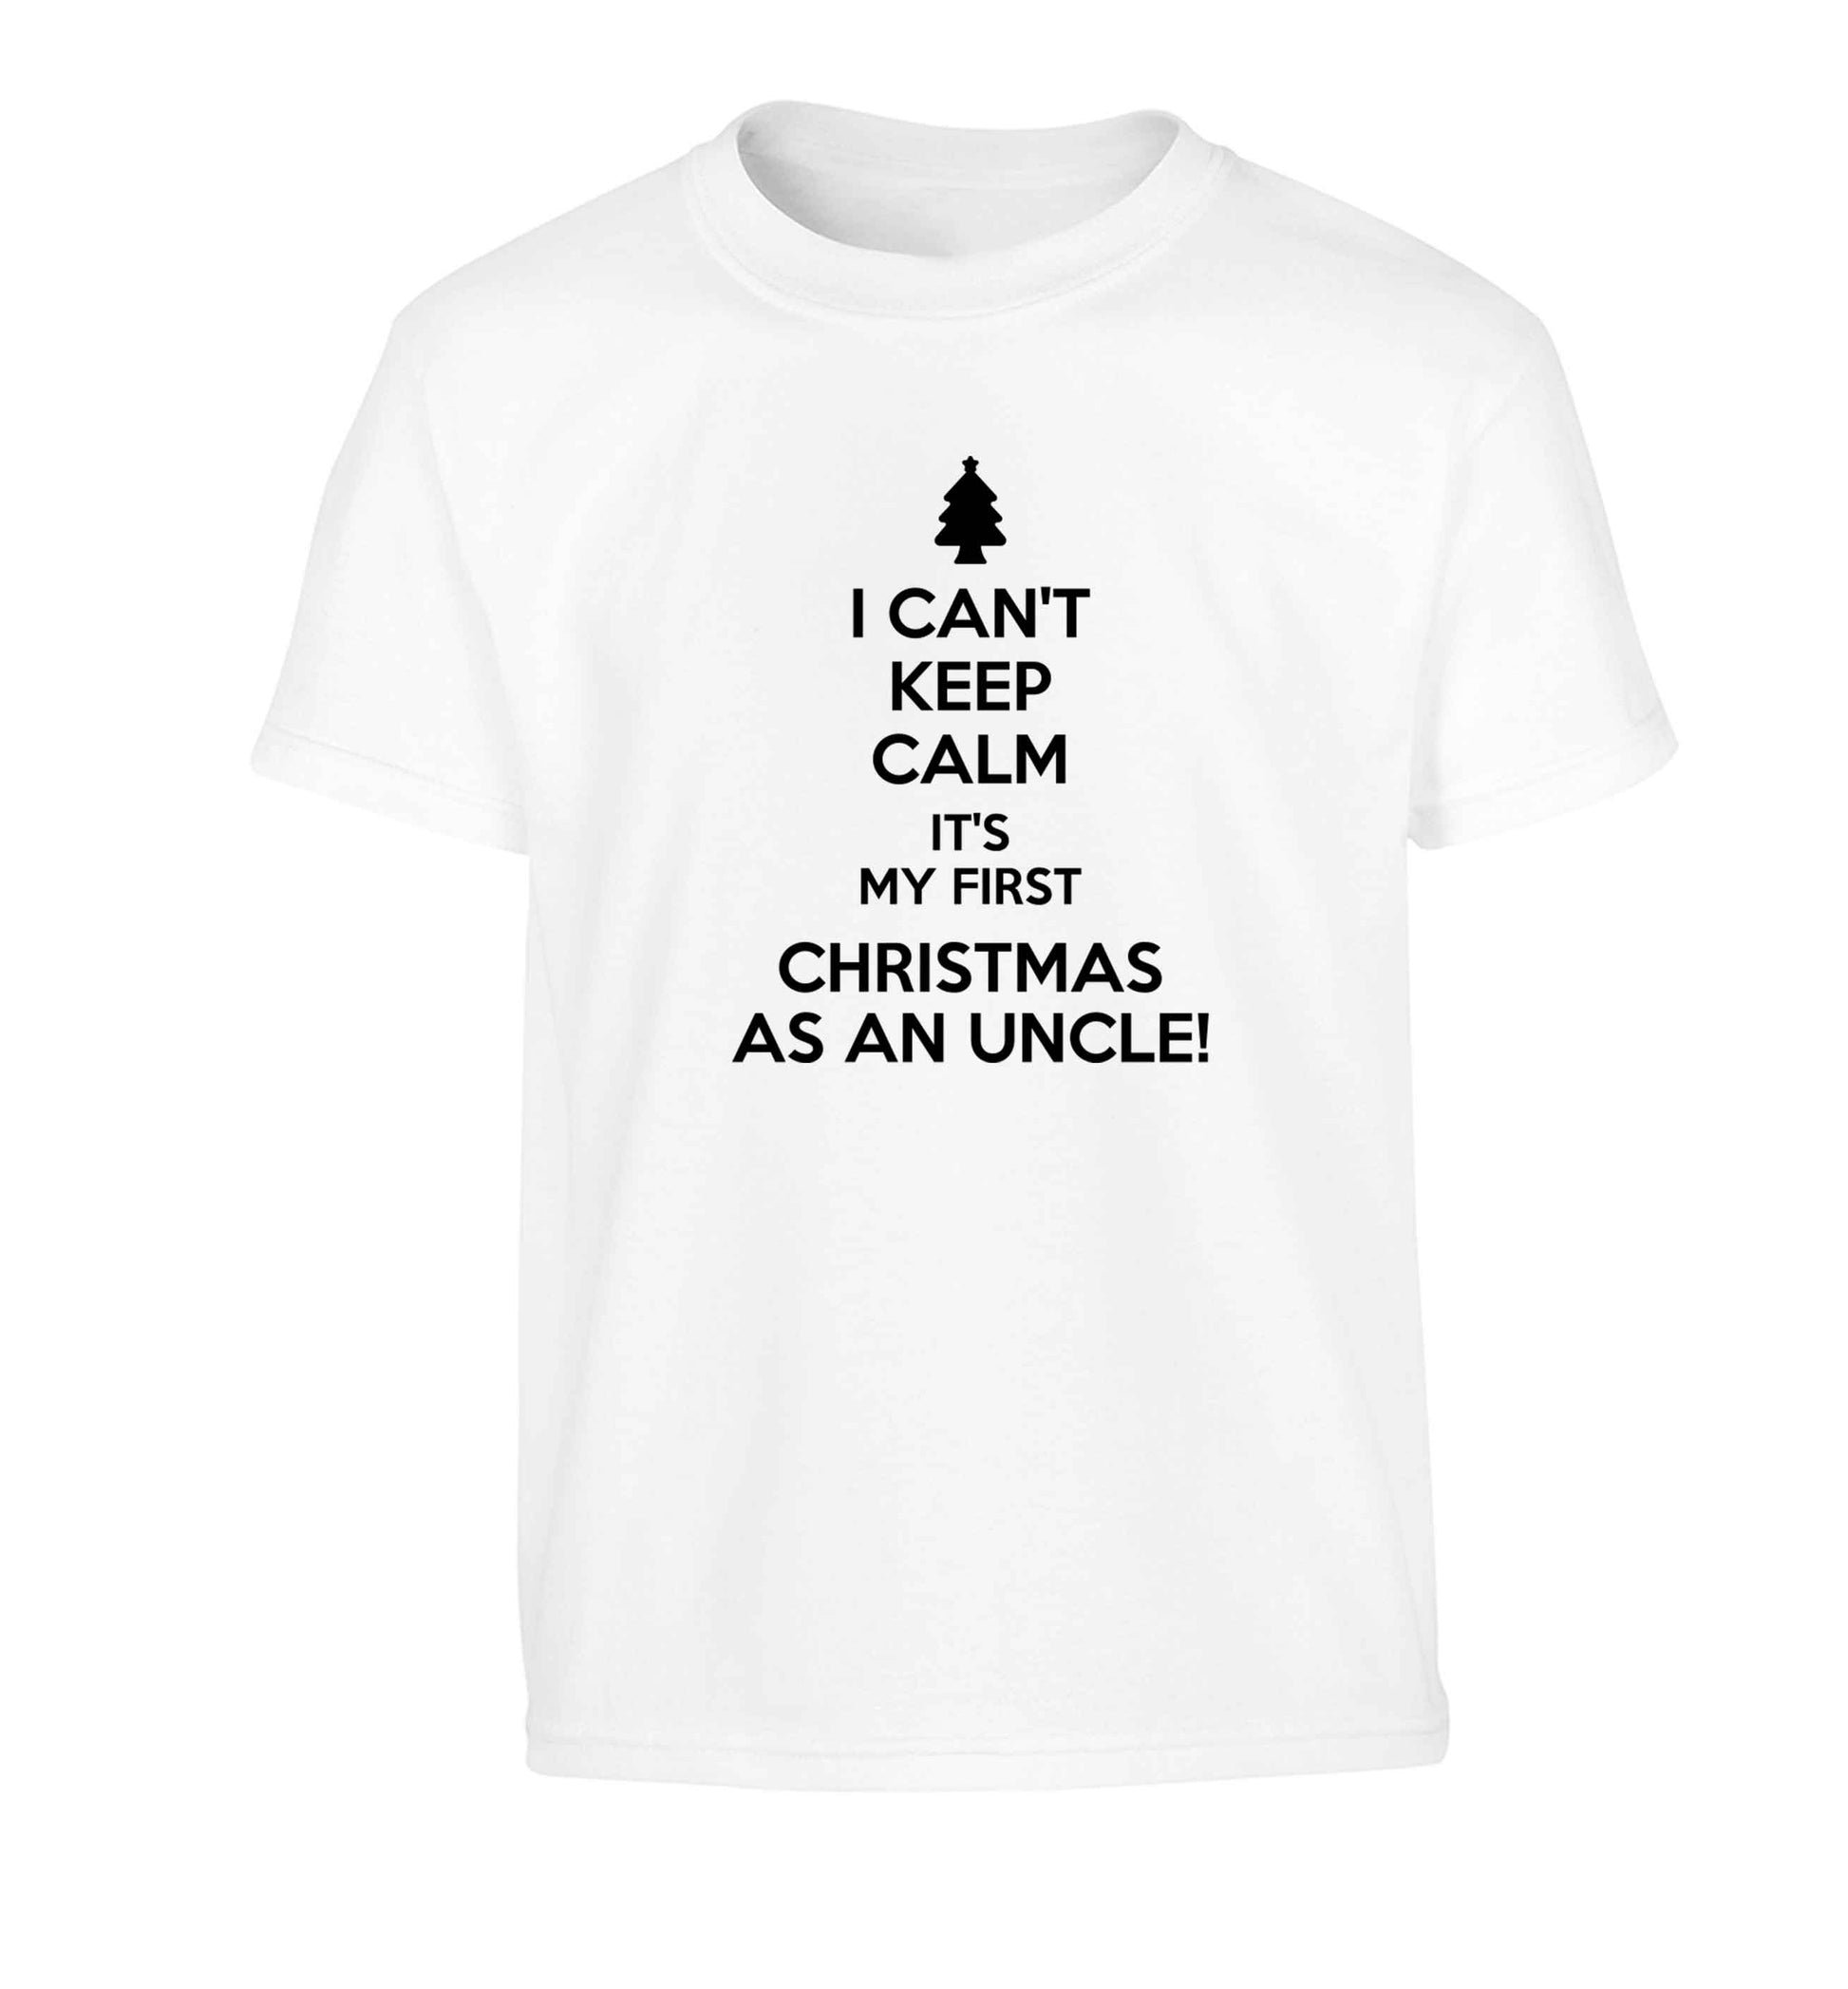 I can't keep calm it's my first Christmas as an uncle! Children's white Tshirt 12-13 Years